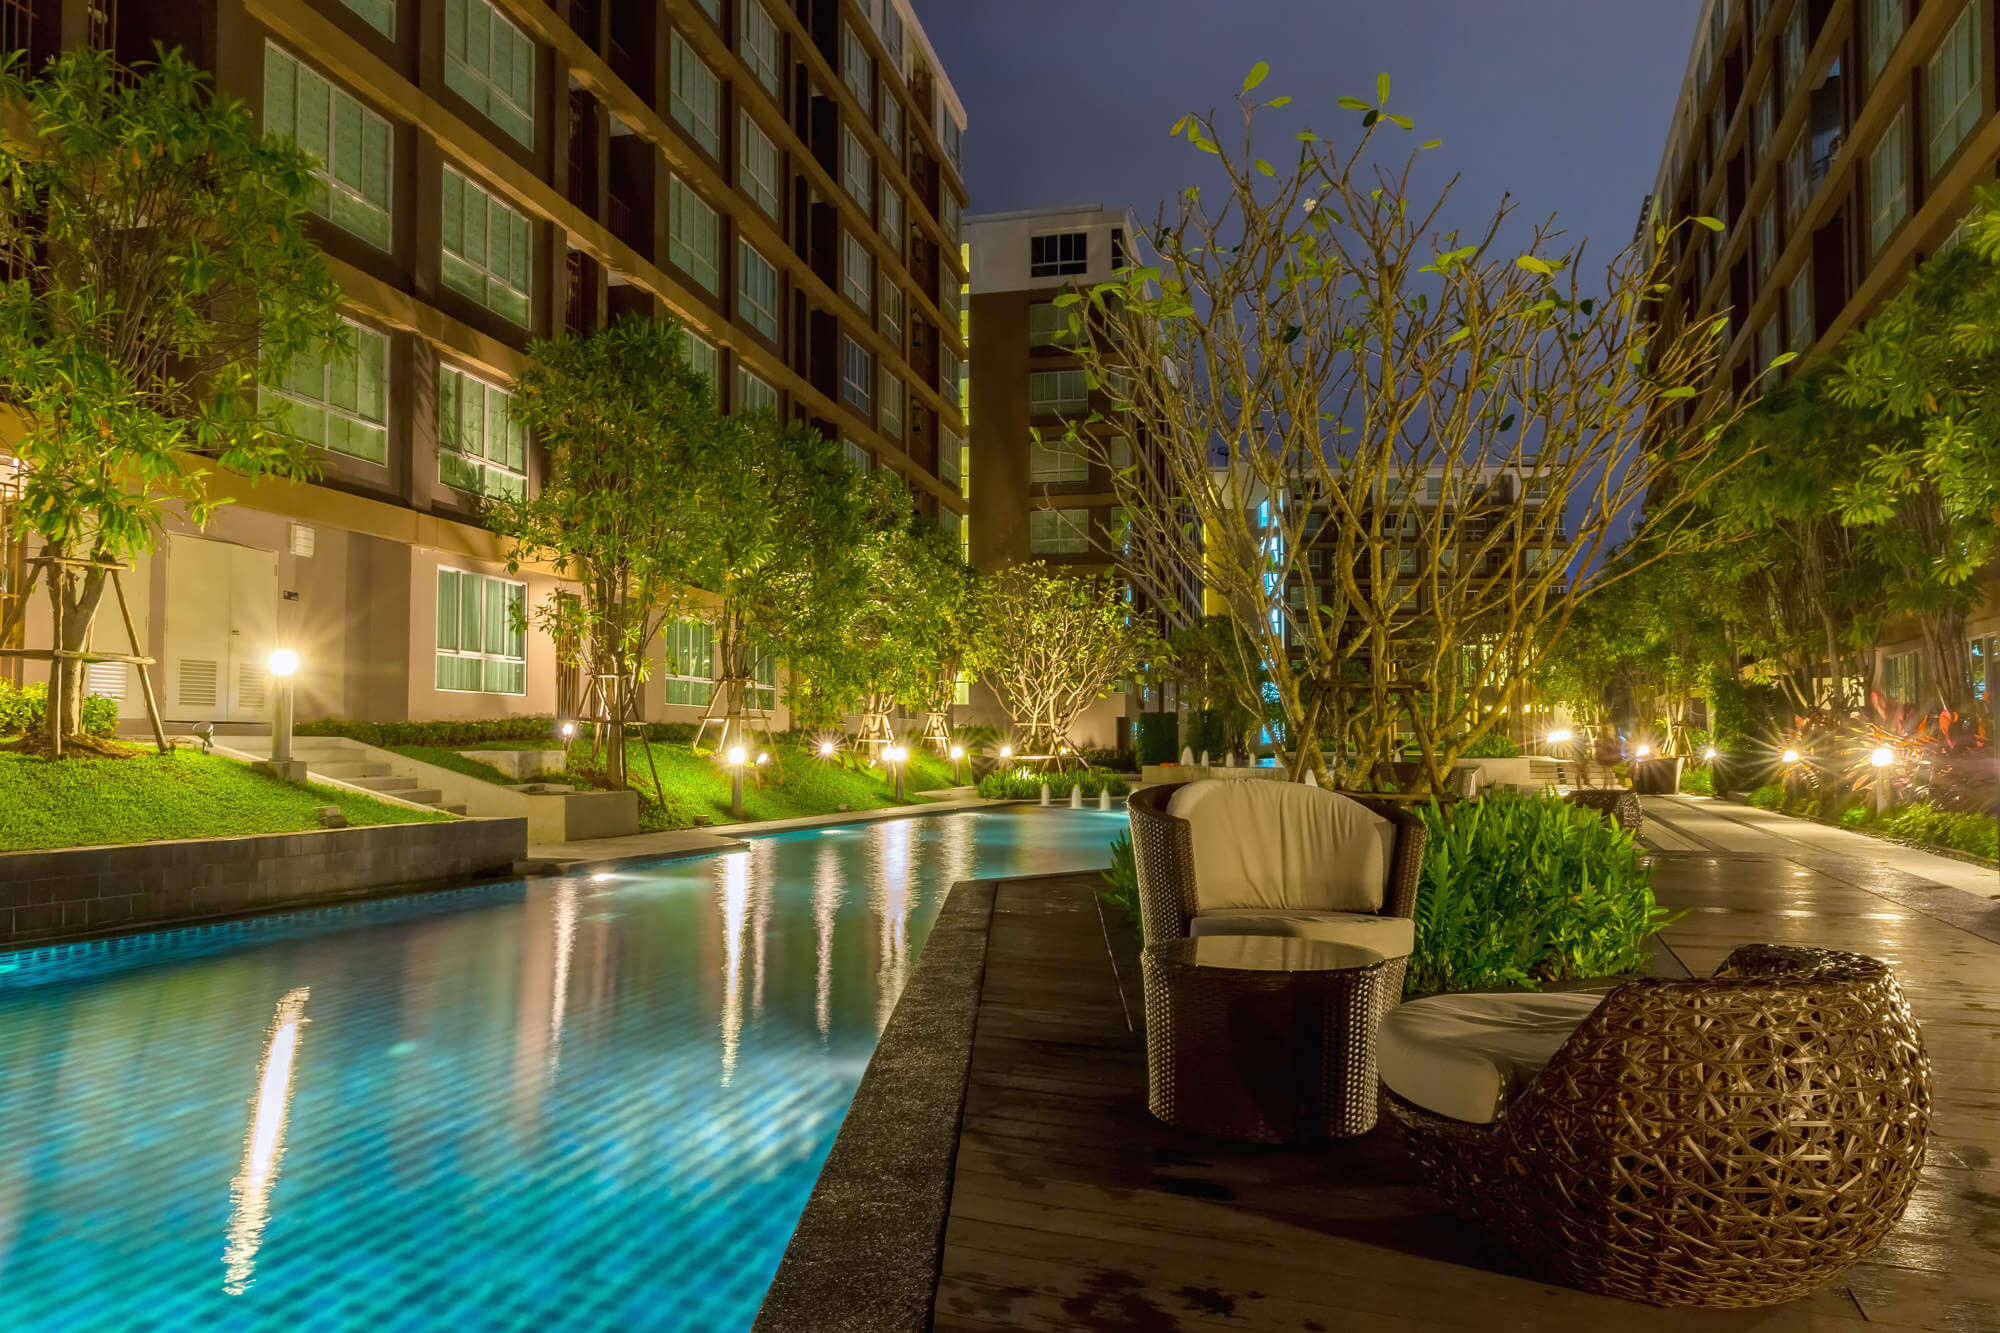 Modern residential apartment houses with swimming pool, at night